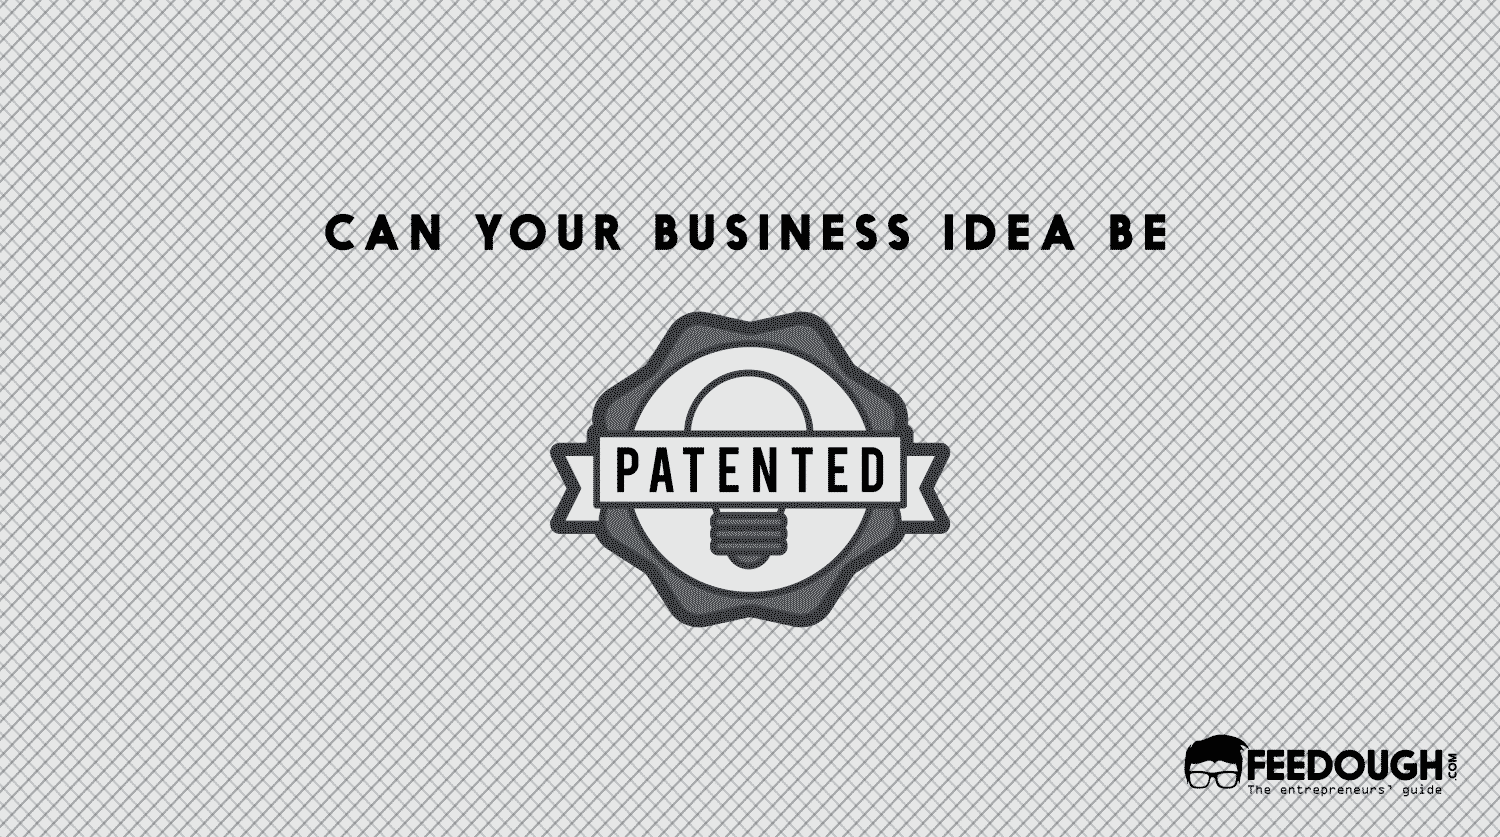 Can You Patent Your Business Idea?